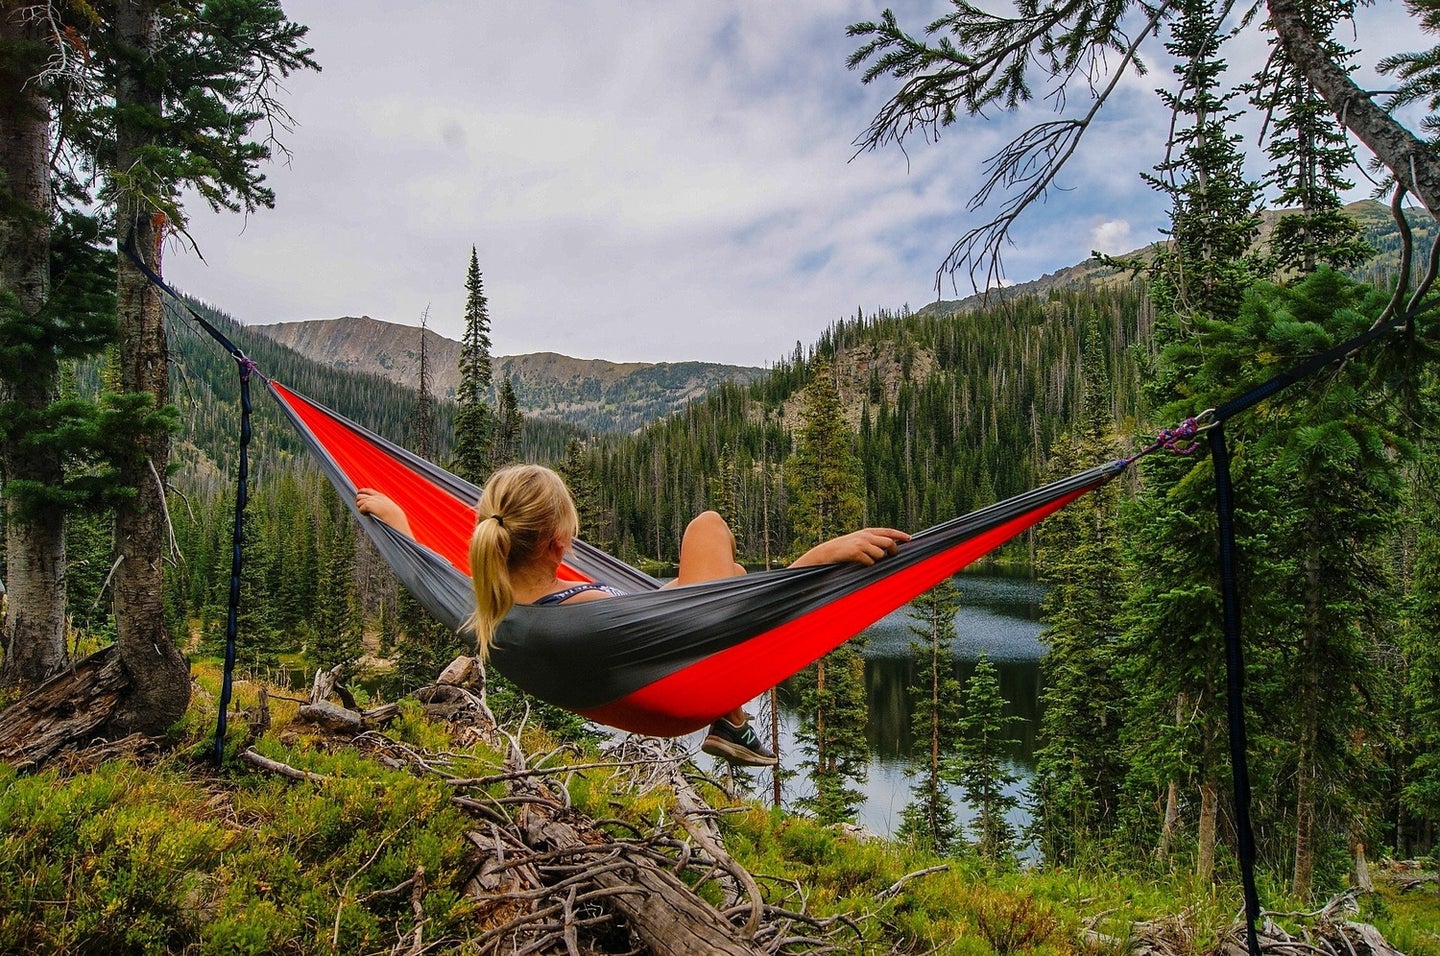 A blonde person sitting in a red camping hammock atop a forested ridge, looking out over a lake in some mountains.